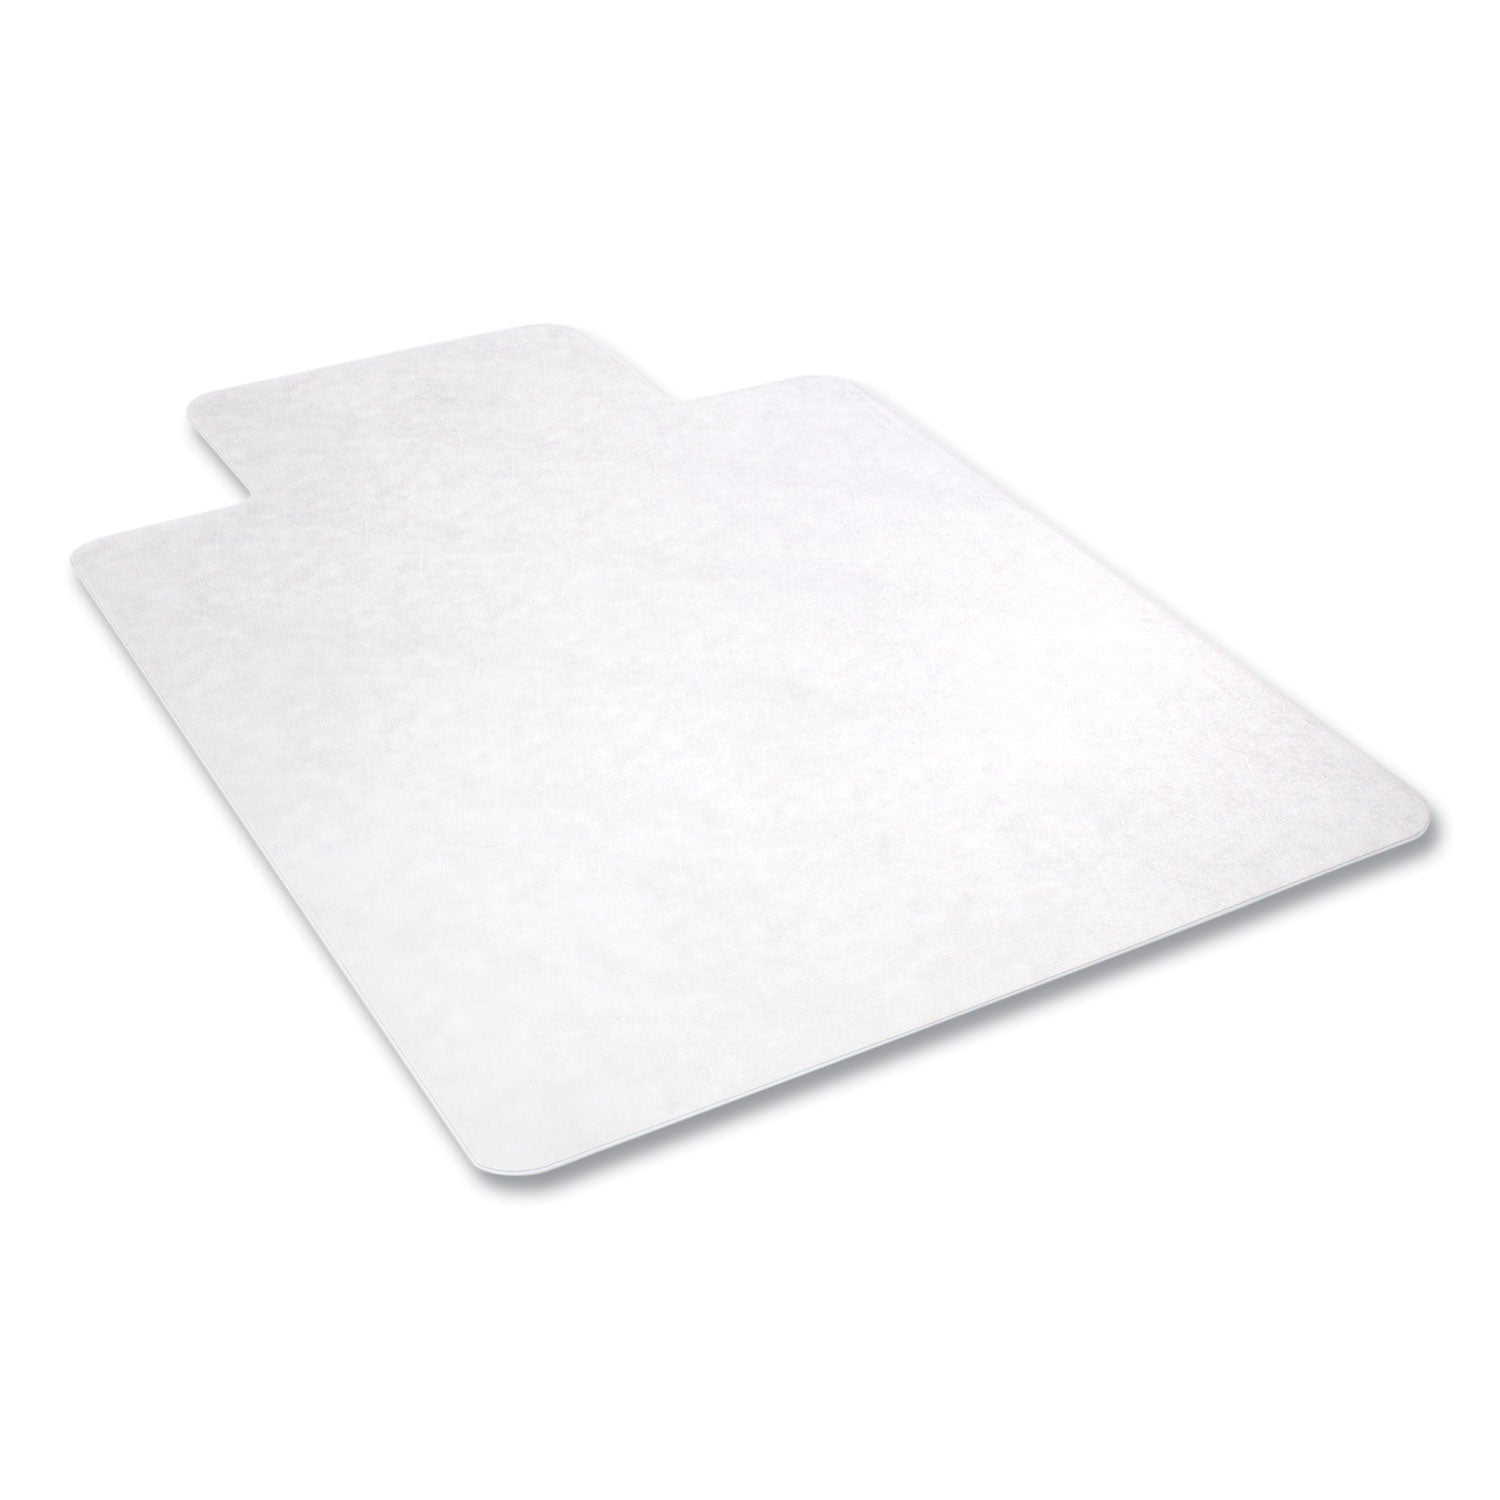 economat-antimicrobial-chair-mat-lipped-36-x-48-clear-ships-in-4-6-business-days_defcm2e112amcom - 7